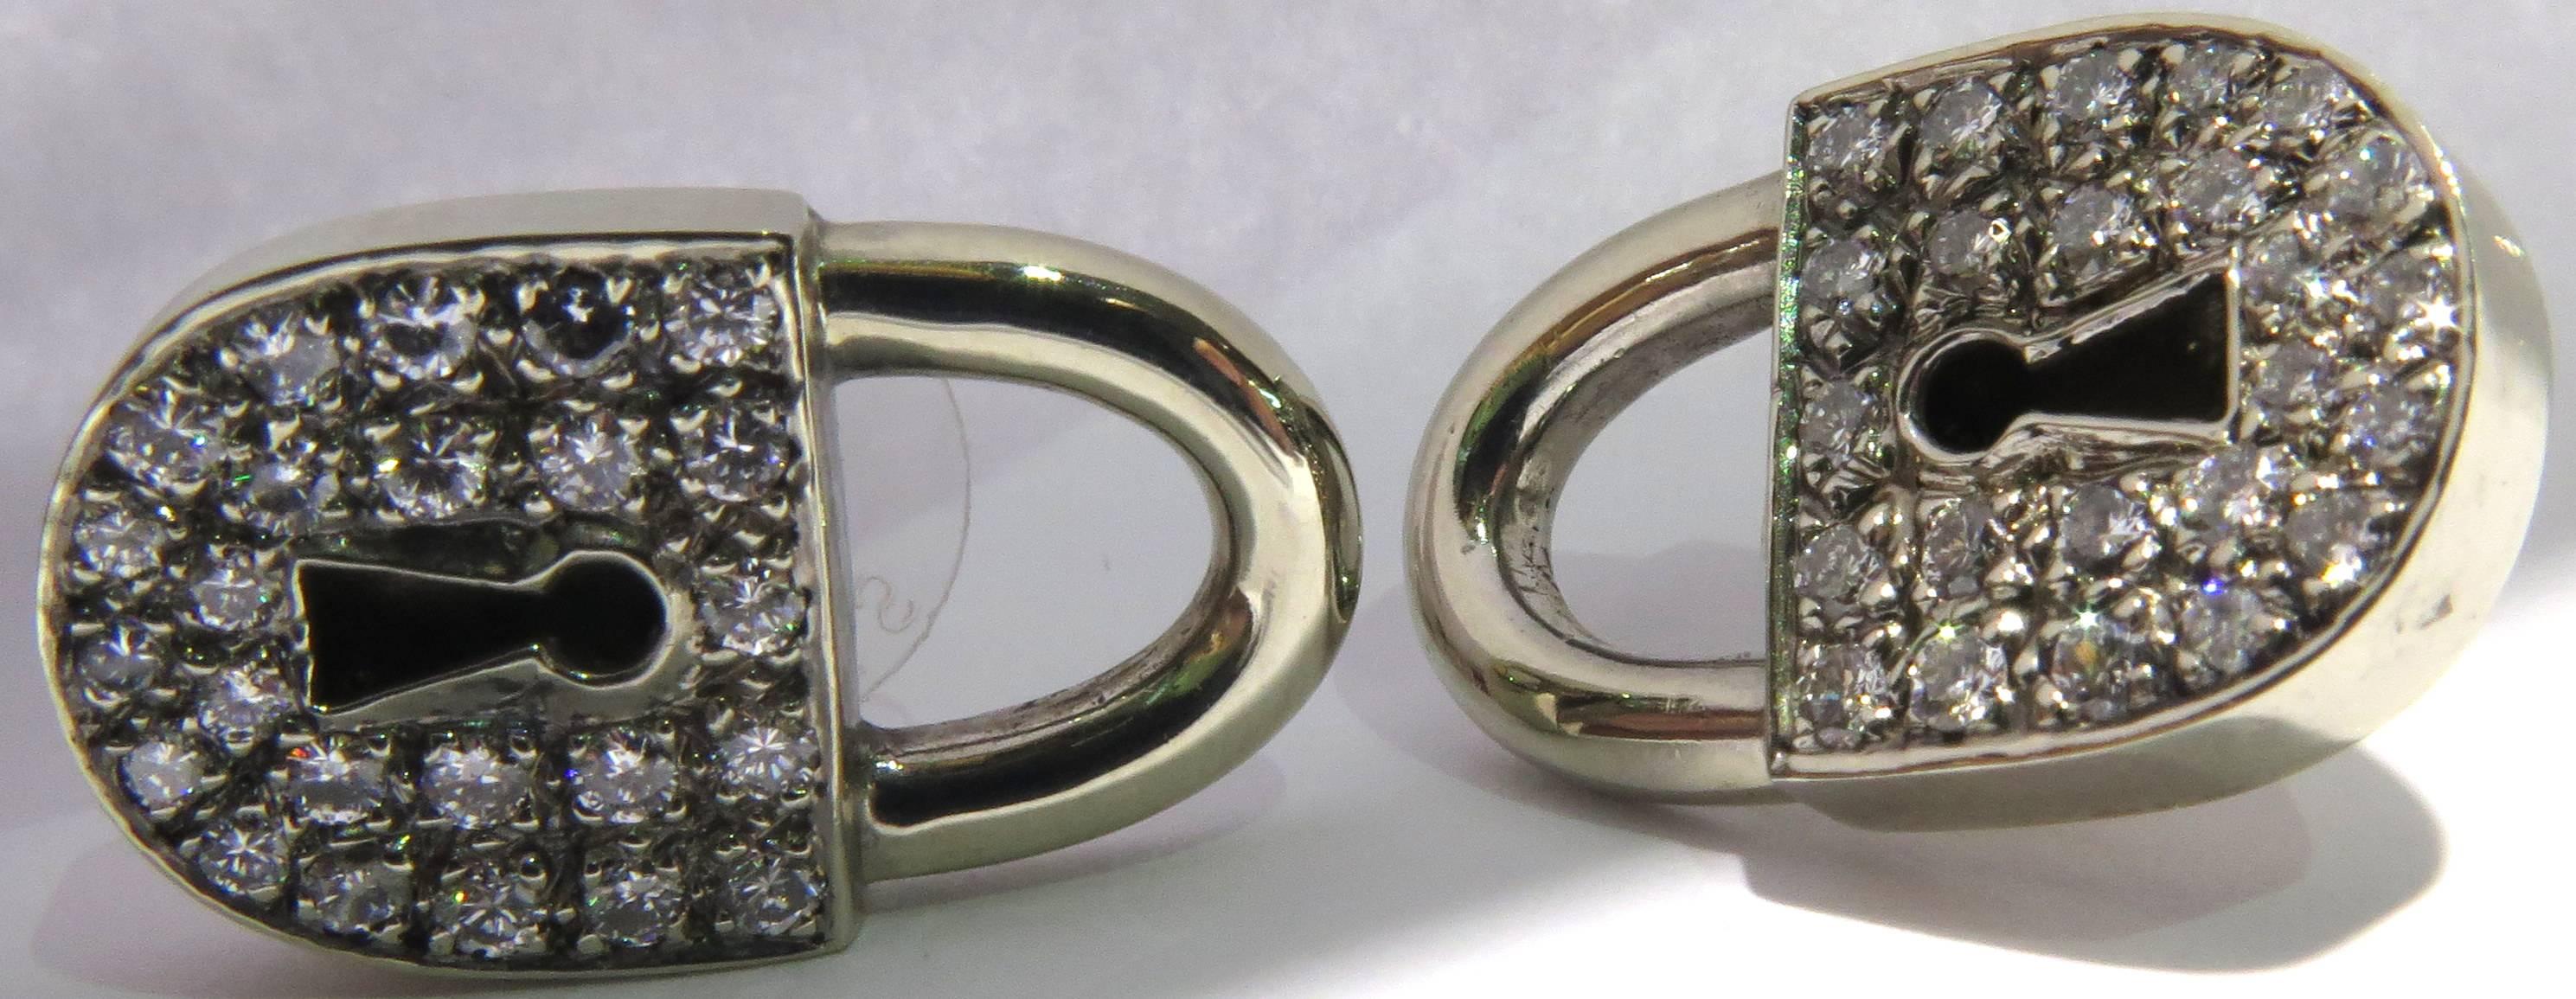 Unique Diamond White Gold Post Lock Motif Earrings In Excellent Condition For Sale In Palm Beach, FL